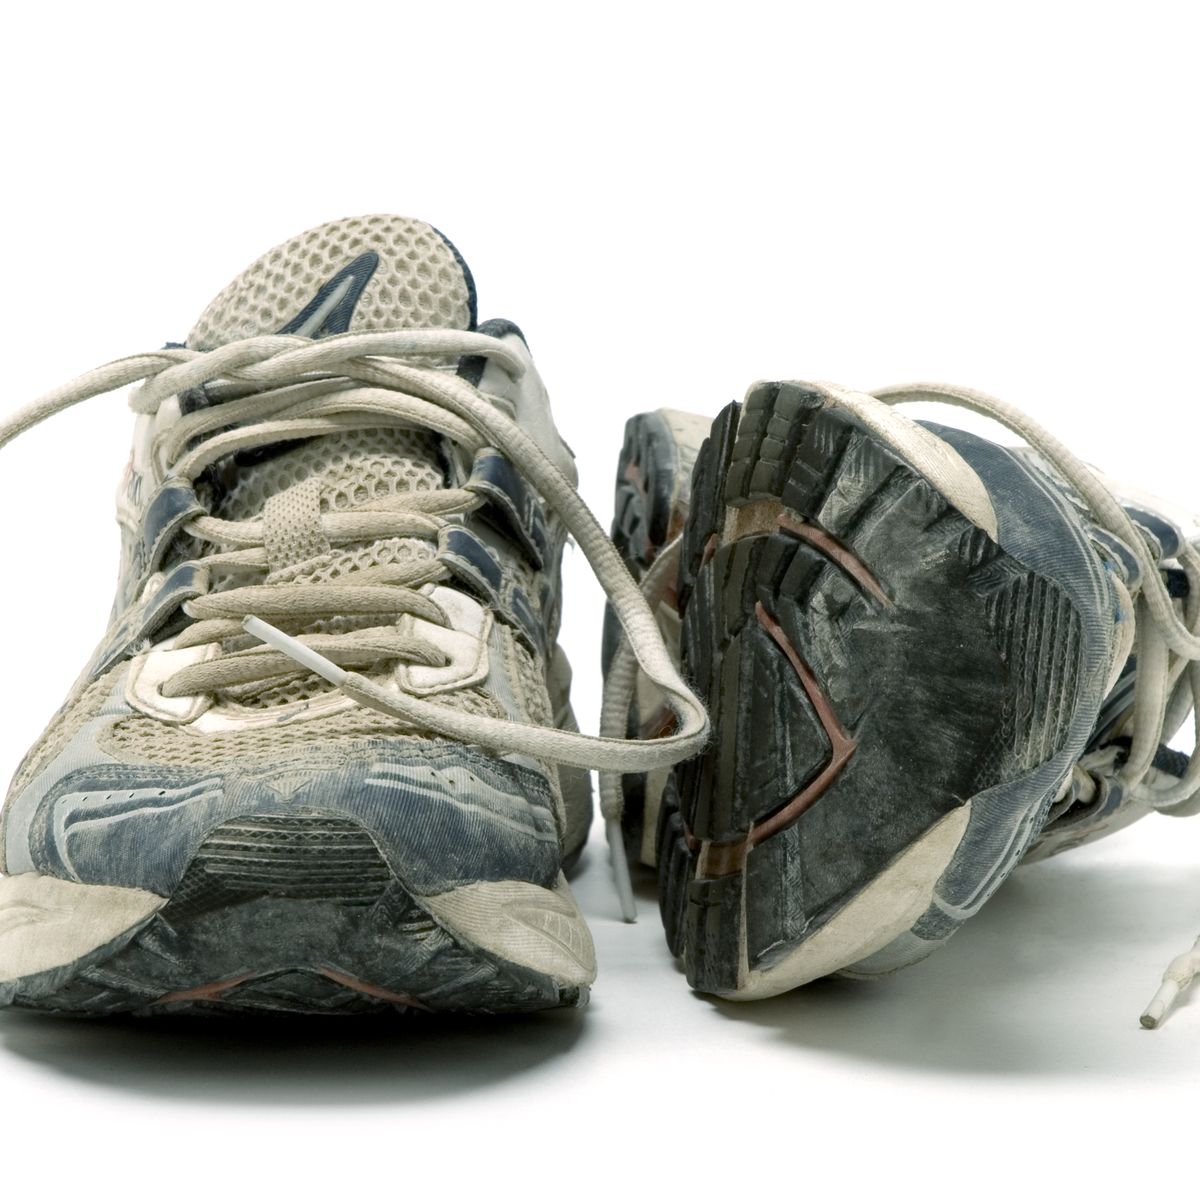 How Long Do Running Shoes Last? When to Get New Running Shoes